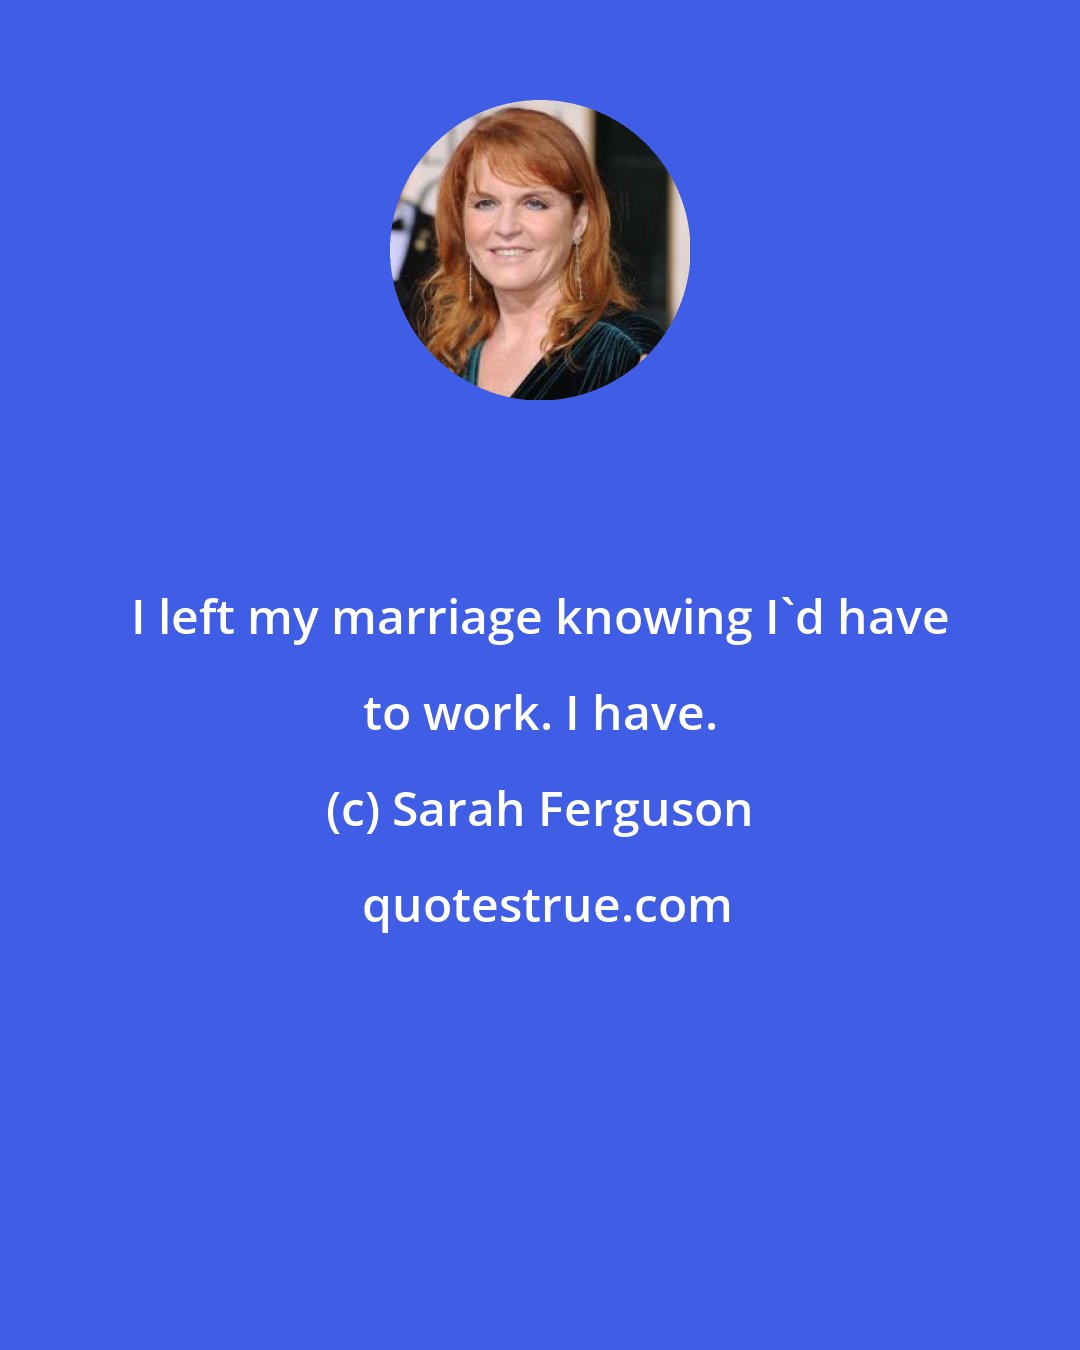 Sarah Ferguson: I left my marriage knowing I'd have to work. I have.